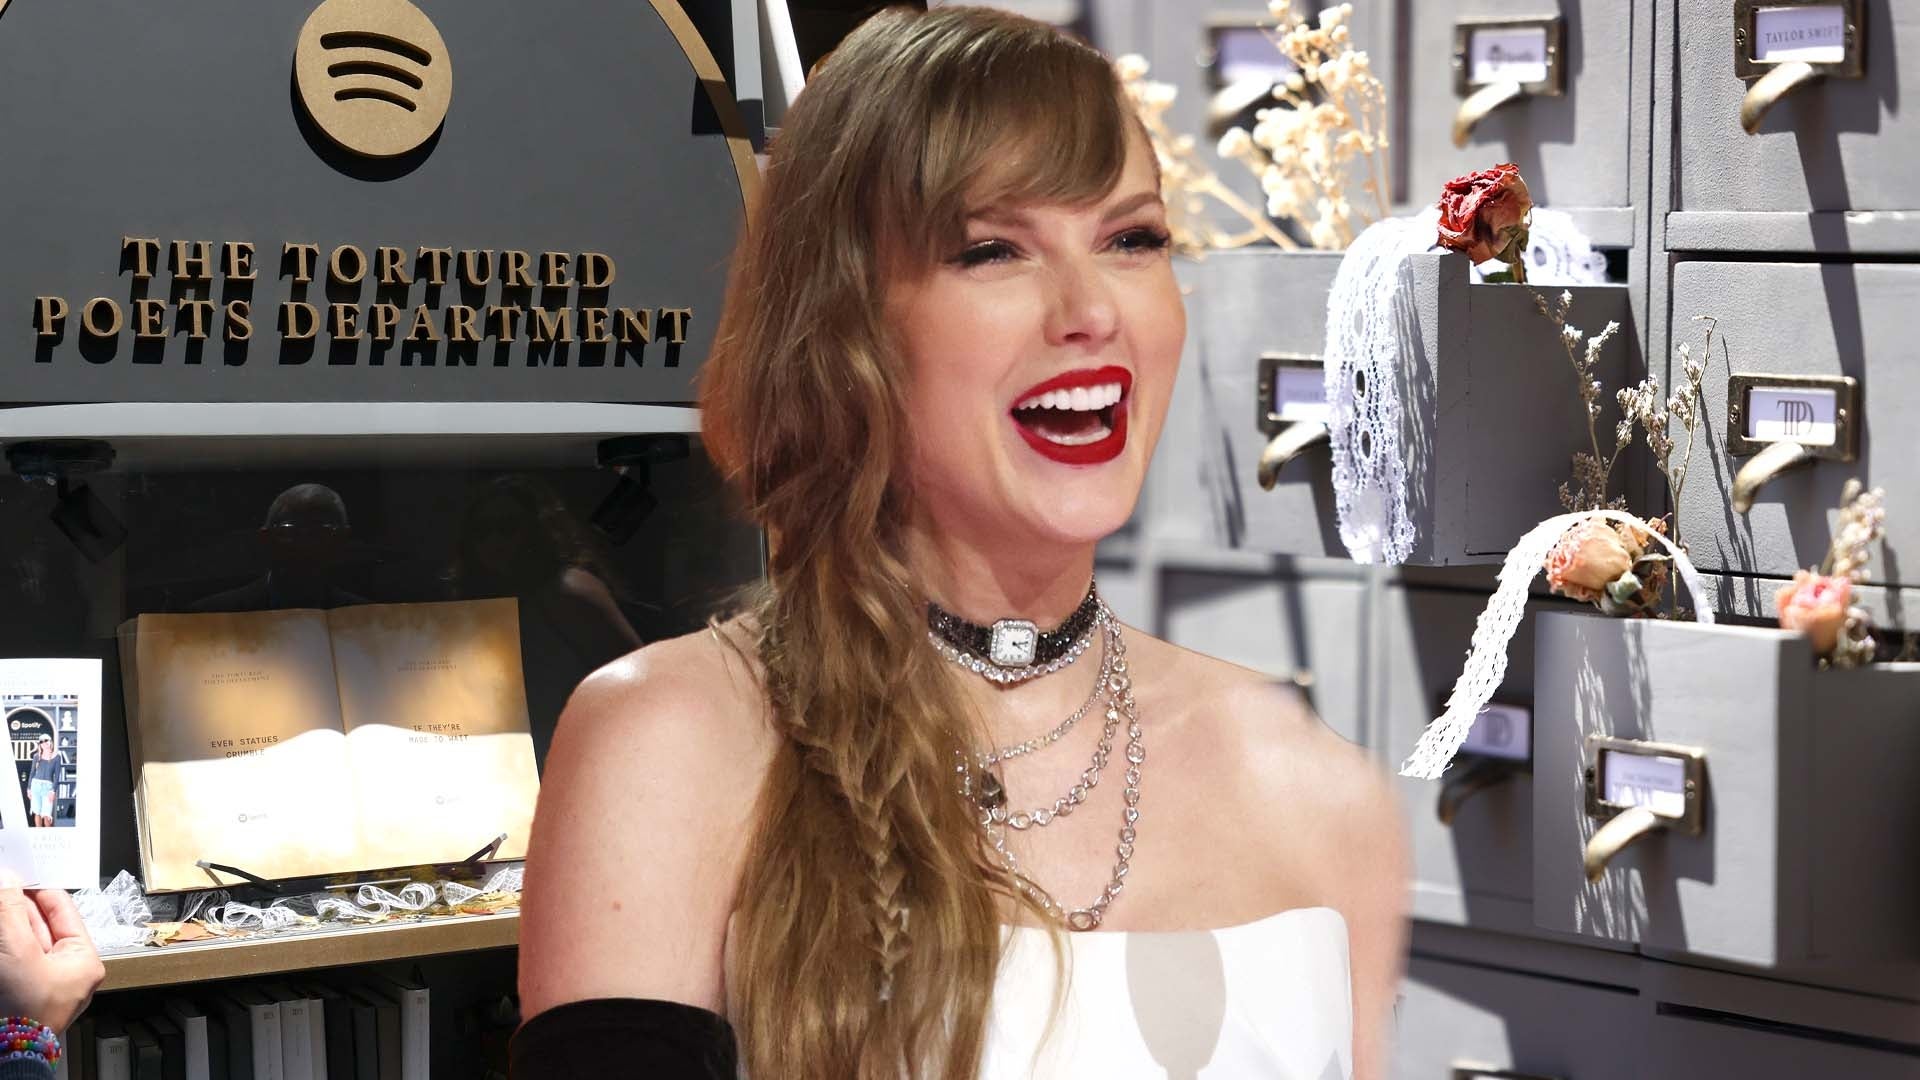 The 7 Biggest Clues Decoded From Taylor Swift's 'Department of Tortured Poets' Library